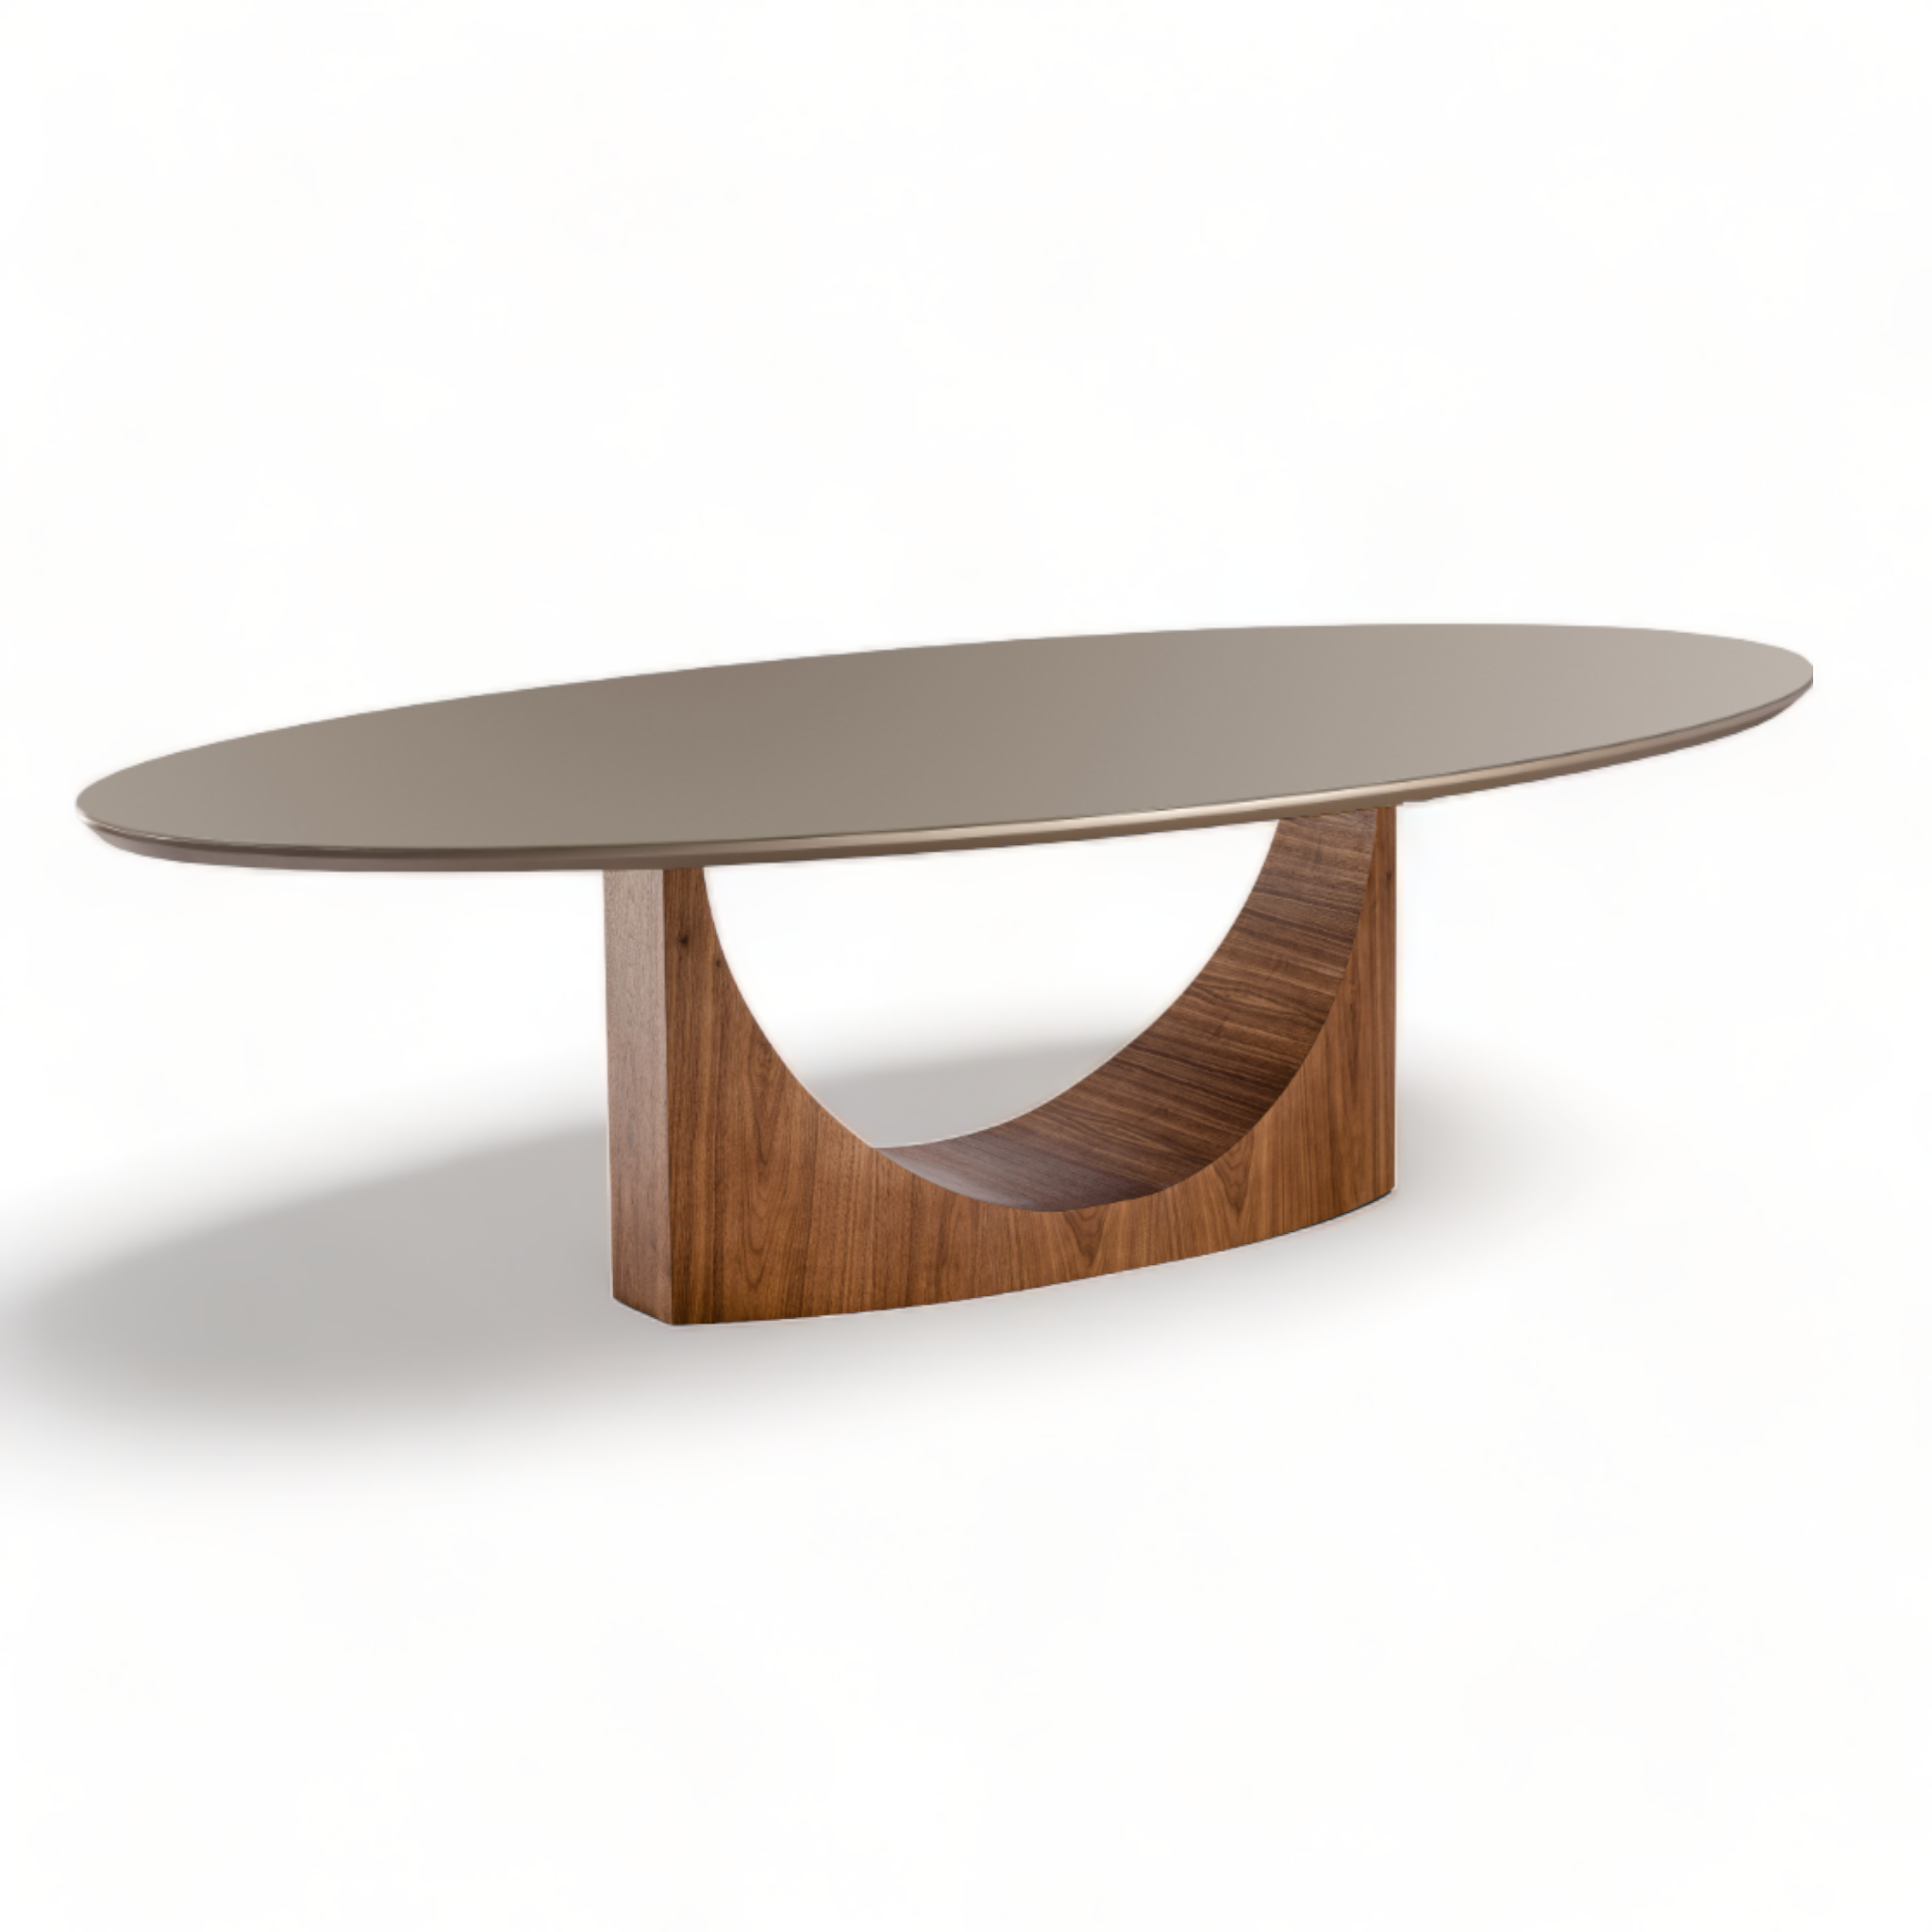 Brisa Oval Dining Table